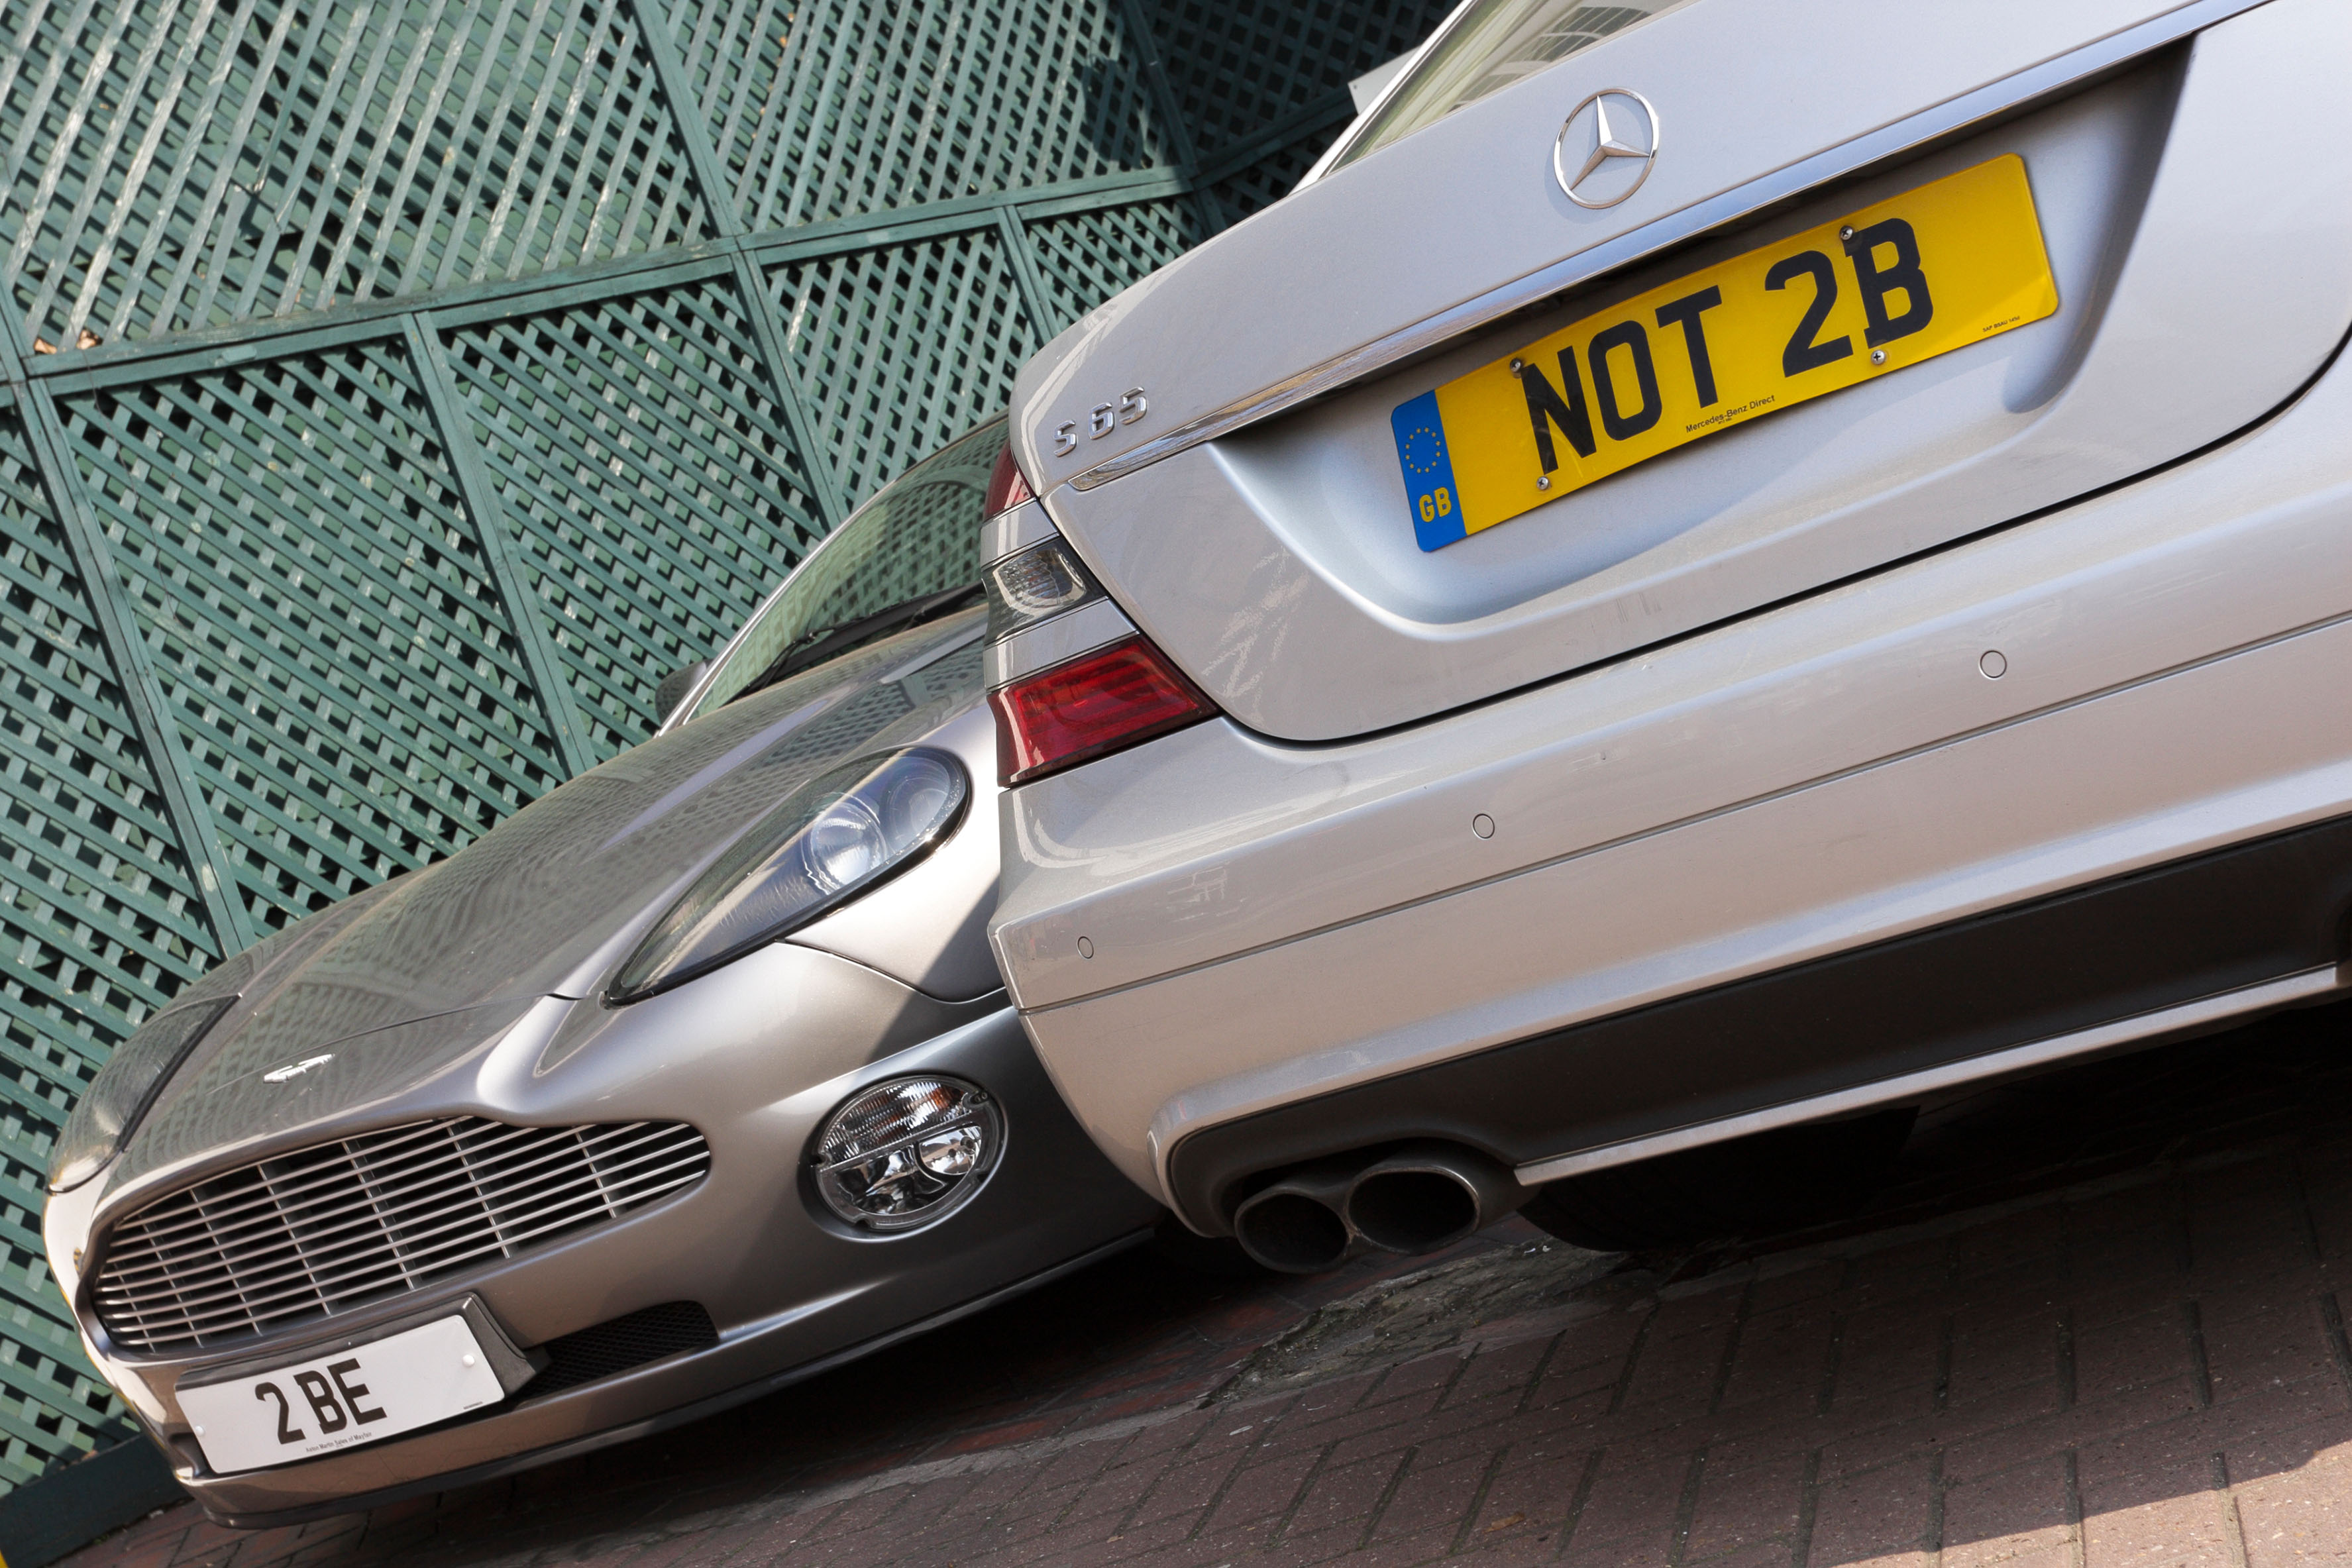 Some of the Uk's most expensive private number plates have been revealed